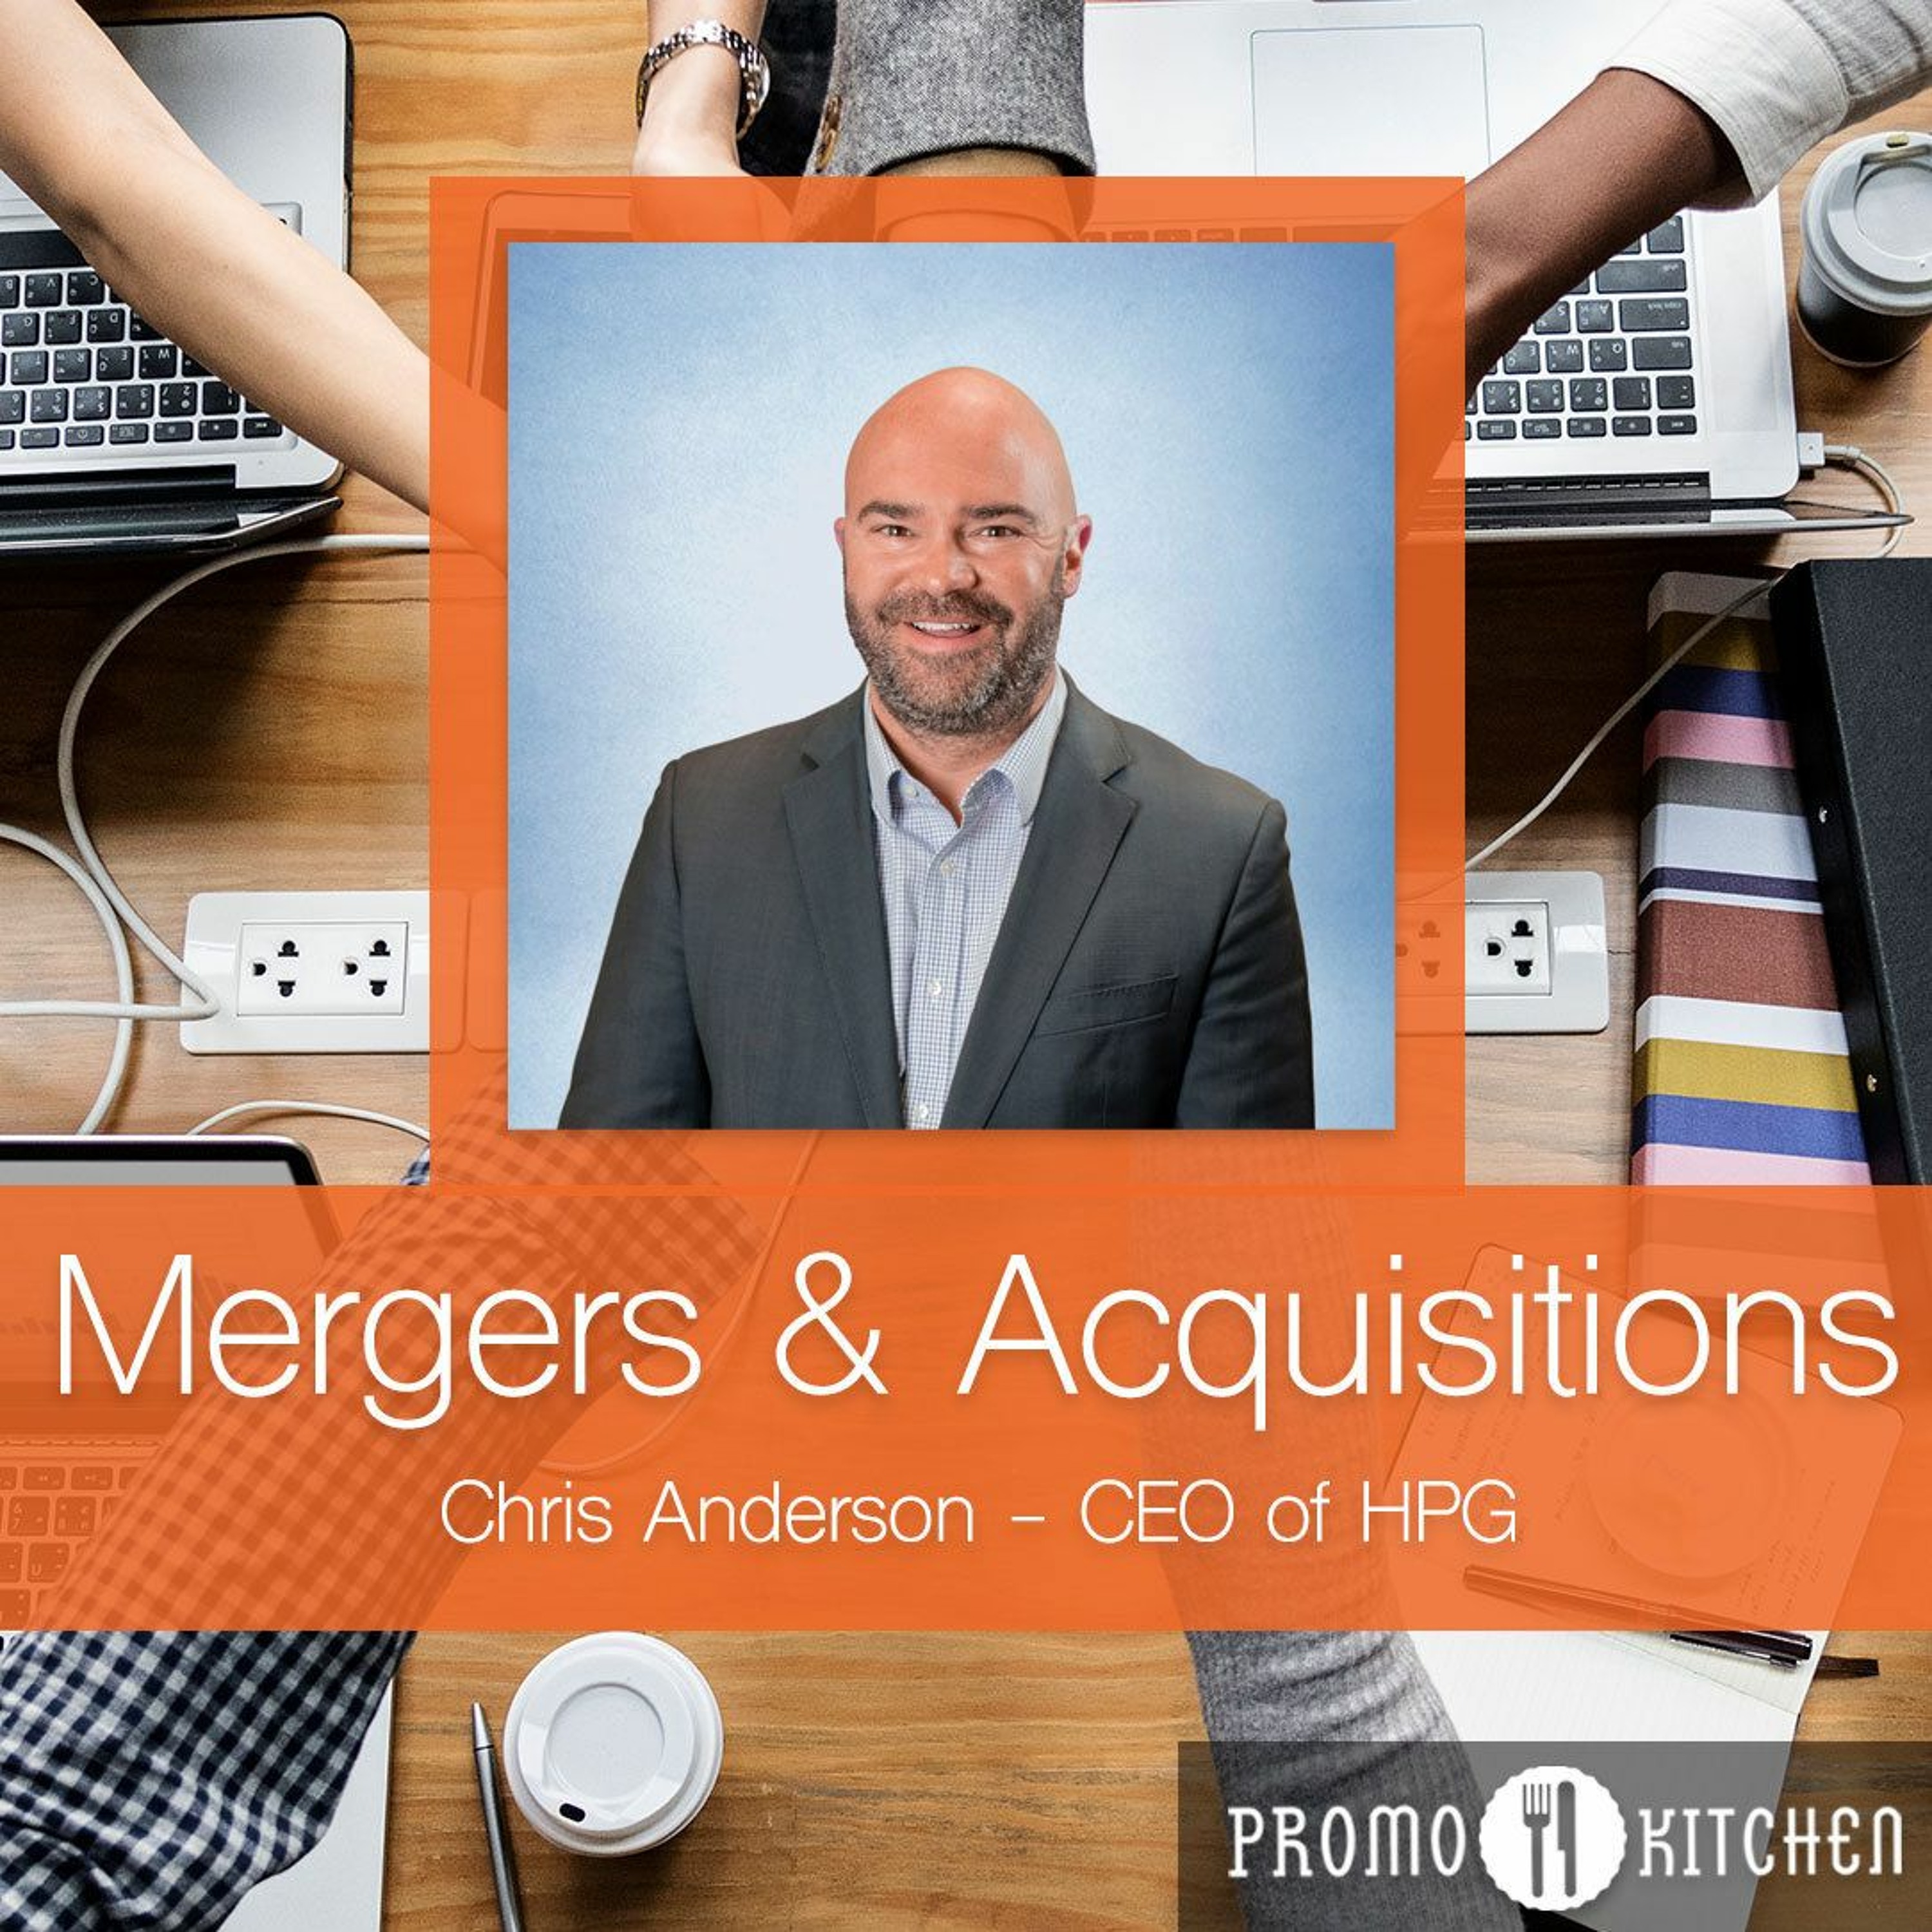 Mergers & Acquisitions - Chris Anderson